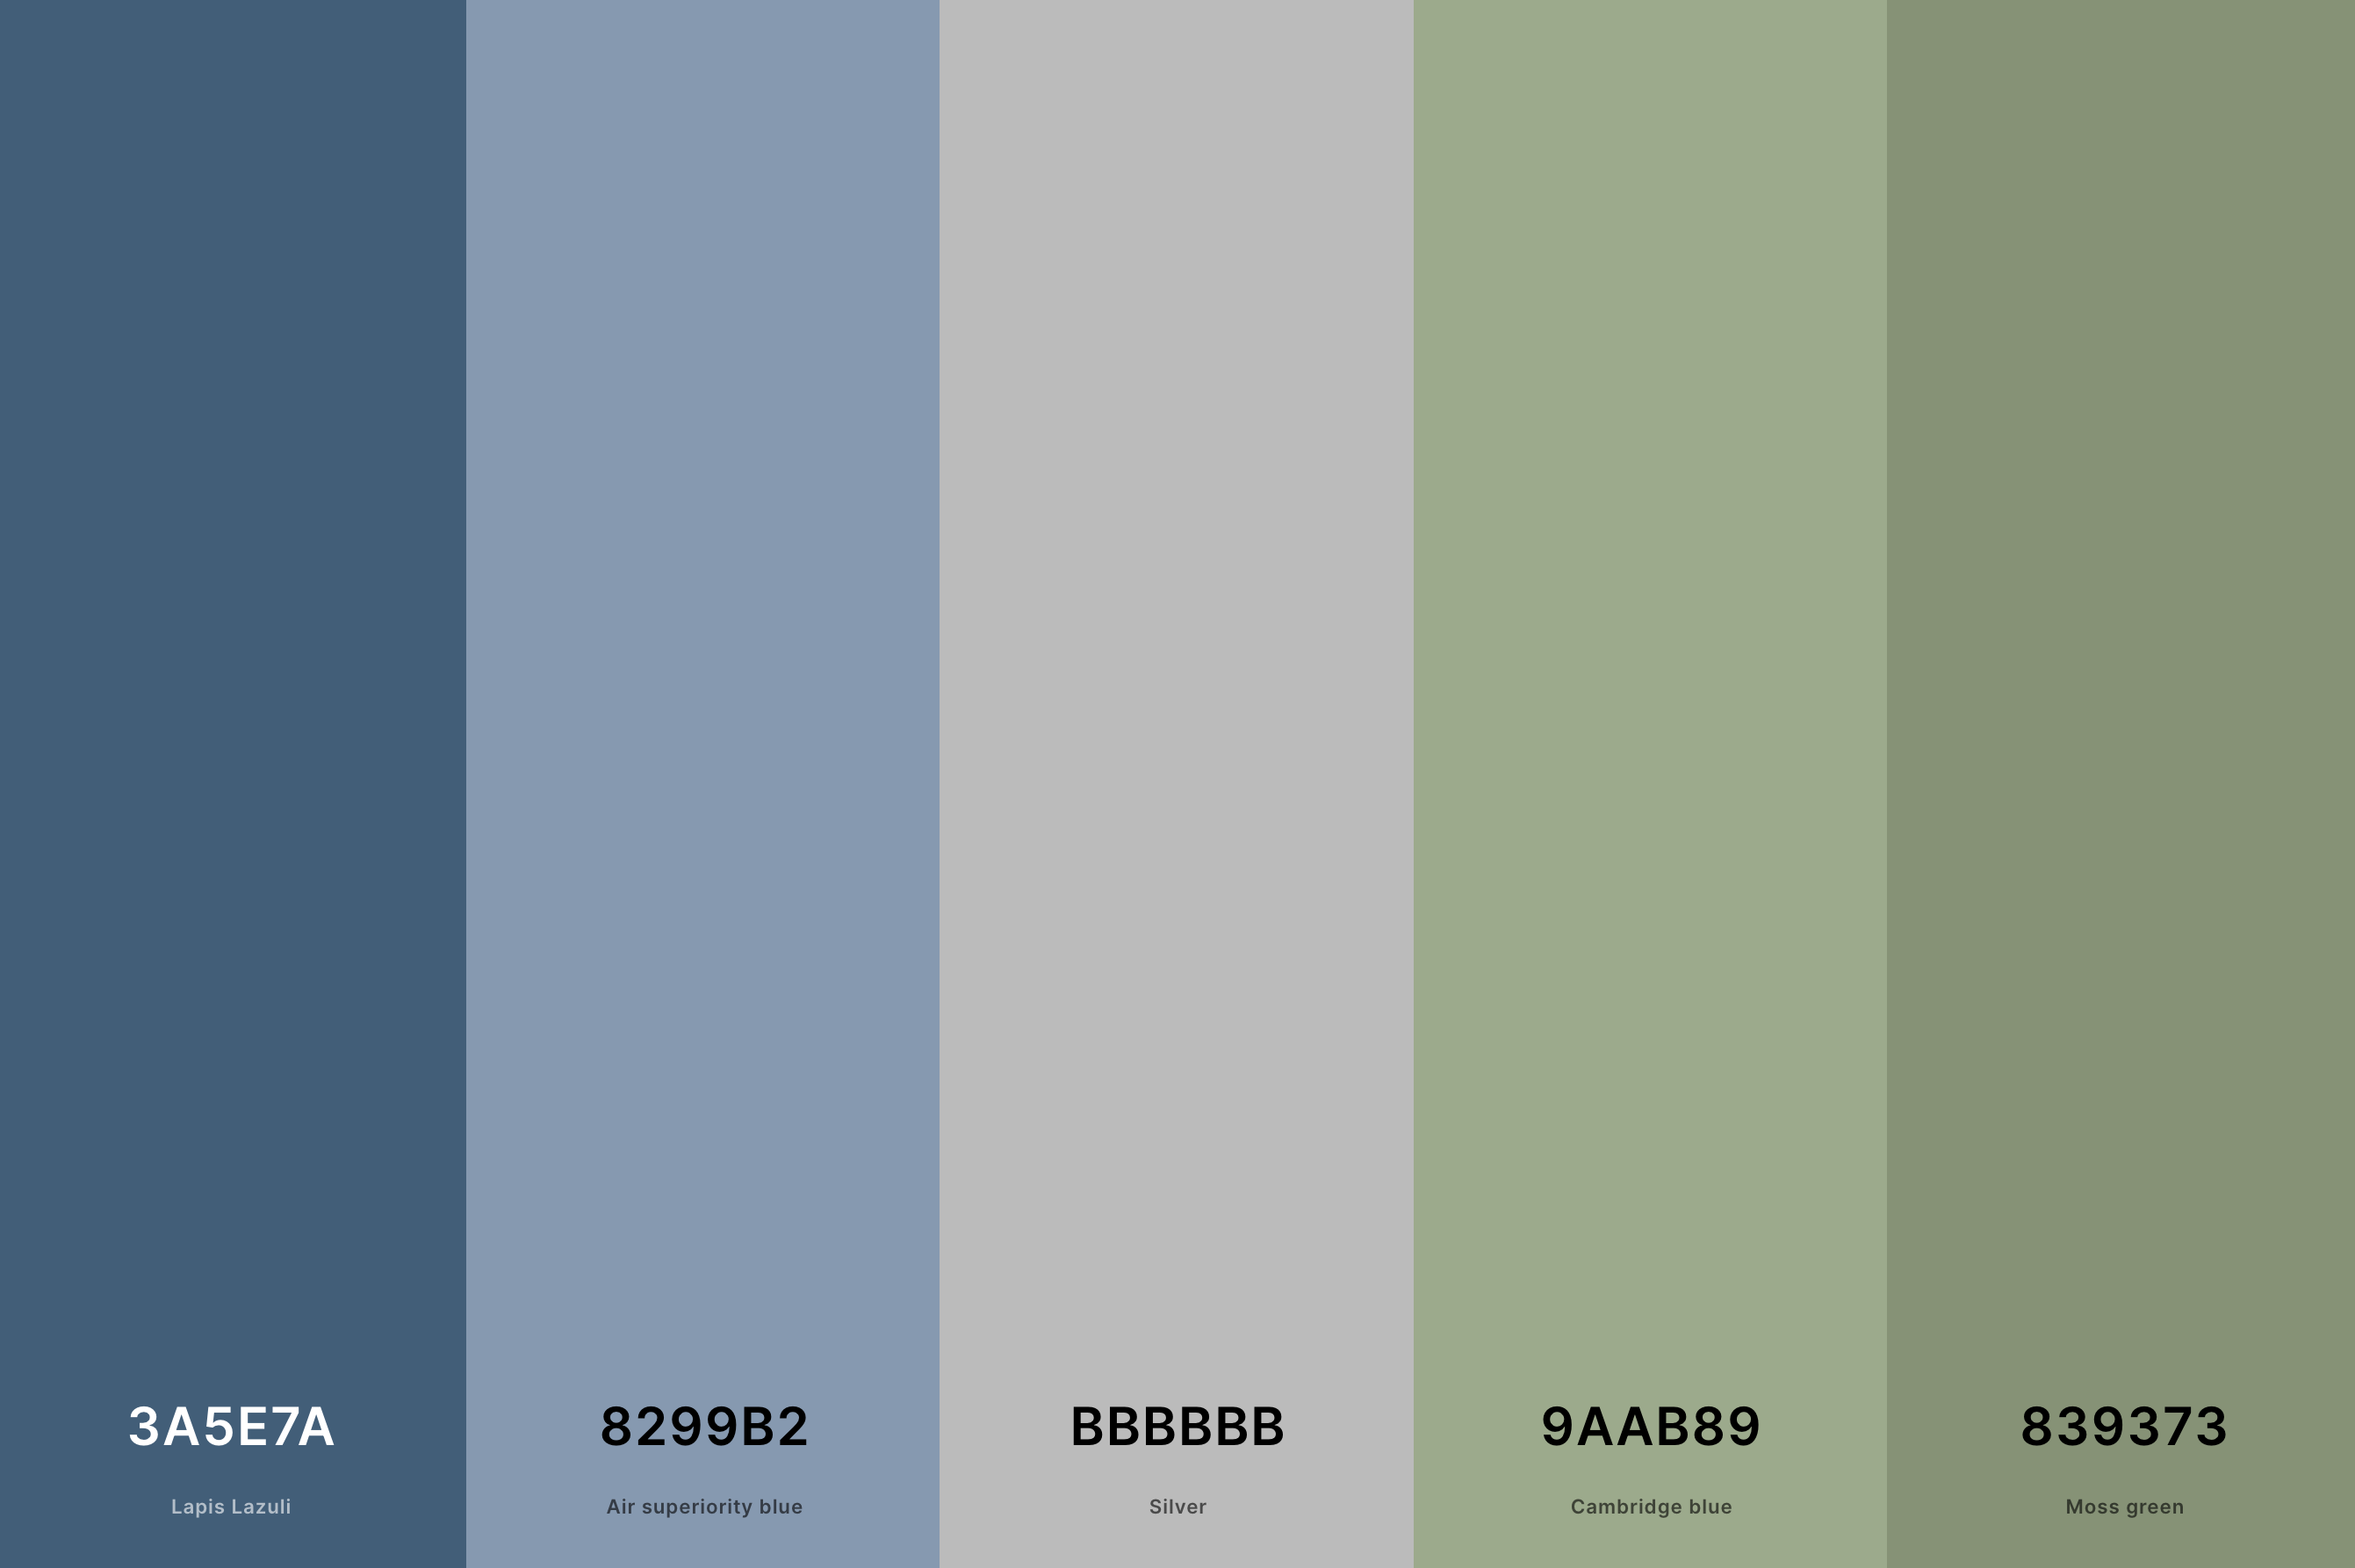 10. Sage Green And Dusty Blue Color Palette Color Palette with Lapis Lazuli (Hex #3A5E7A) + Air Superiority Blue (Hex #8299B2) + Silver (Hex #BBBBBB) + Cambridge Blue (Hex #9AAB89) + Moss Green (Hex #839373) Color Palette with Hex Codes